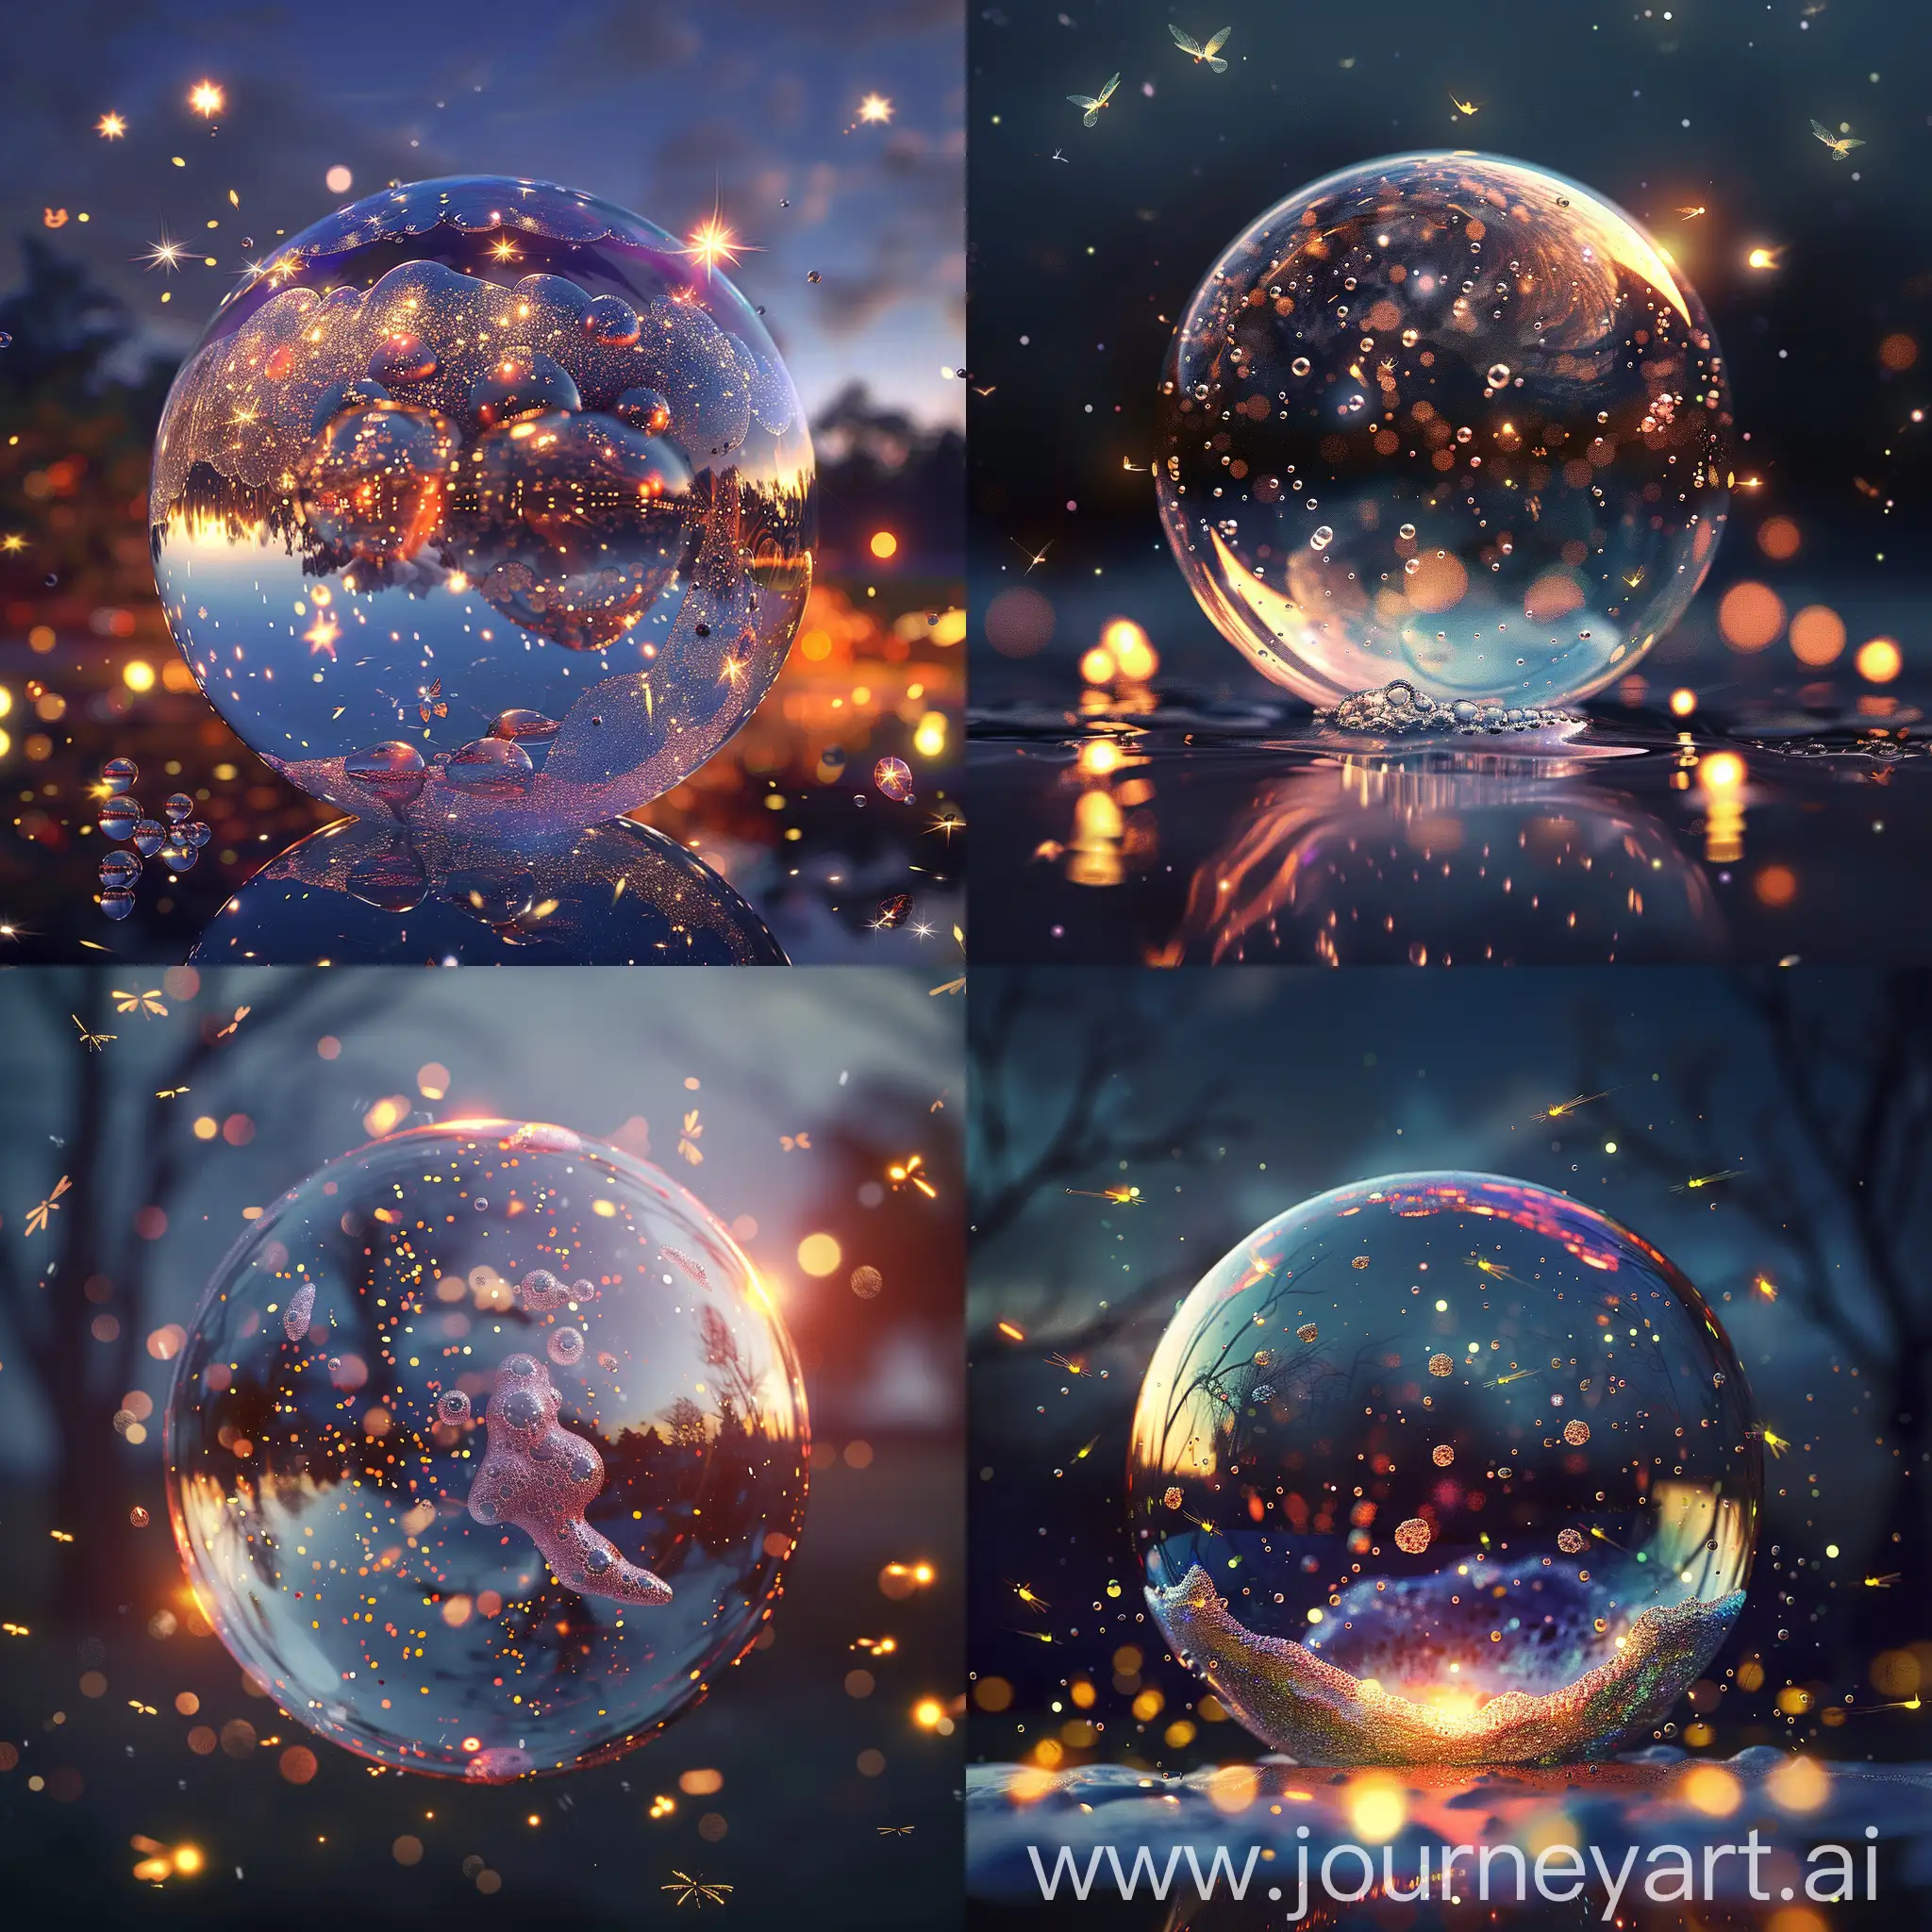 Enchanting-Soap-Bubble-Glowing-in-Night-Sky-with-Fireflies